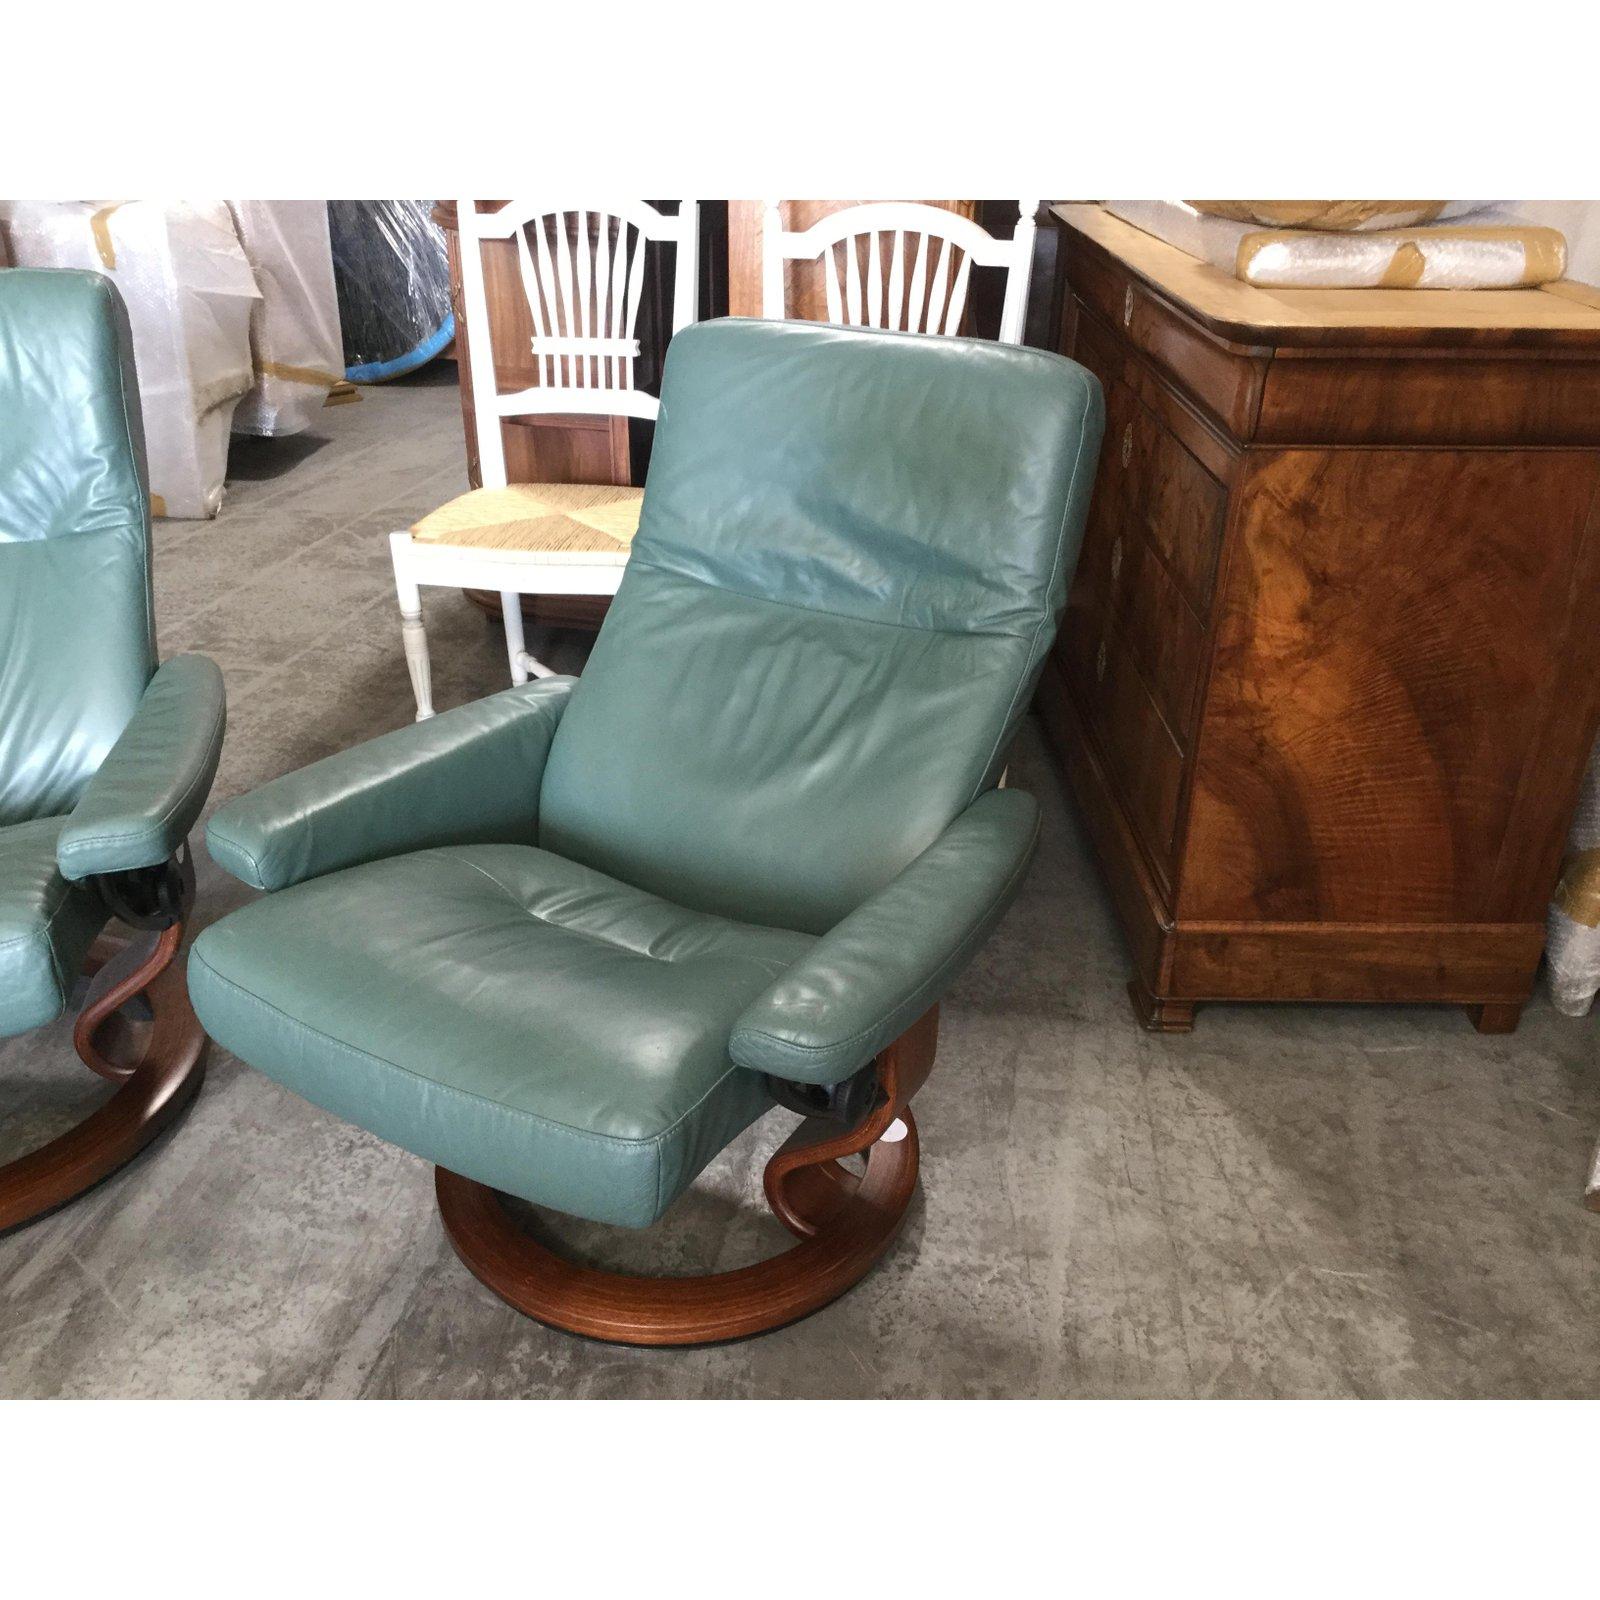 Super Cool Mid-Century Modern Stressless Chairs with Ottomans 1